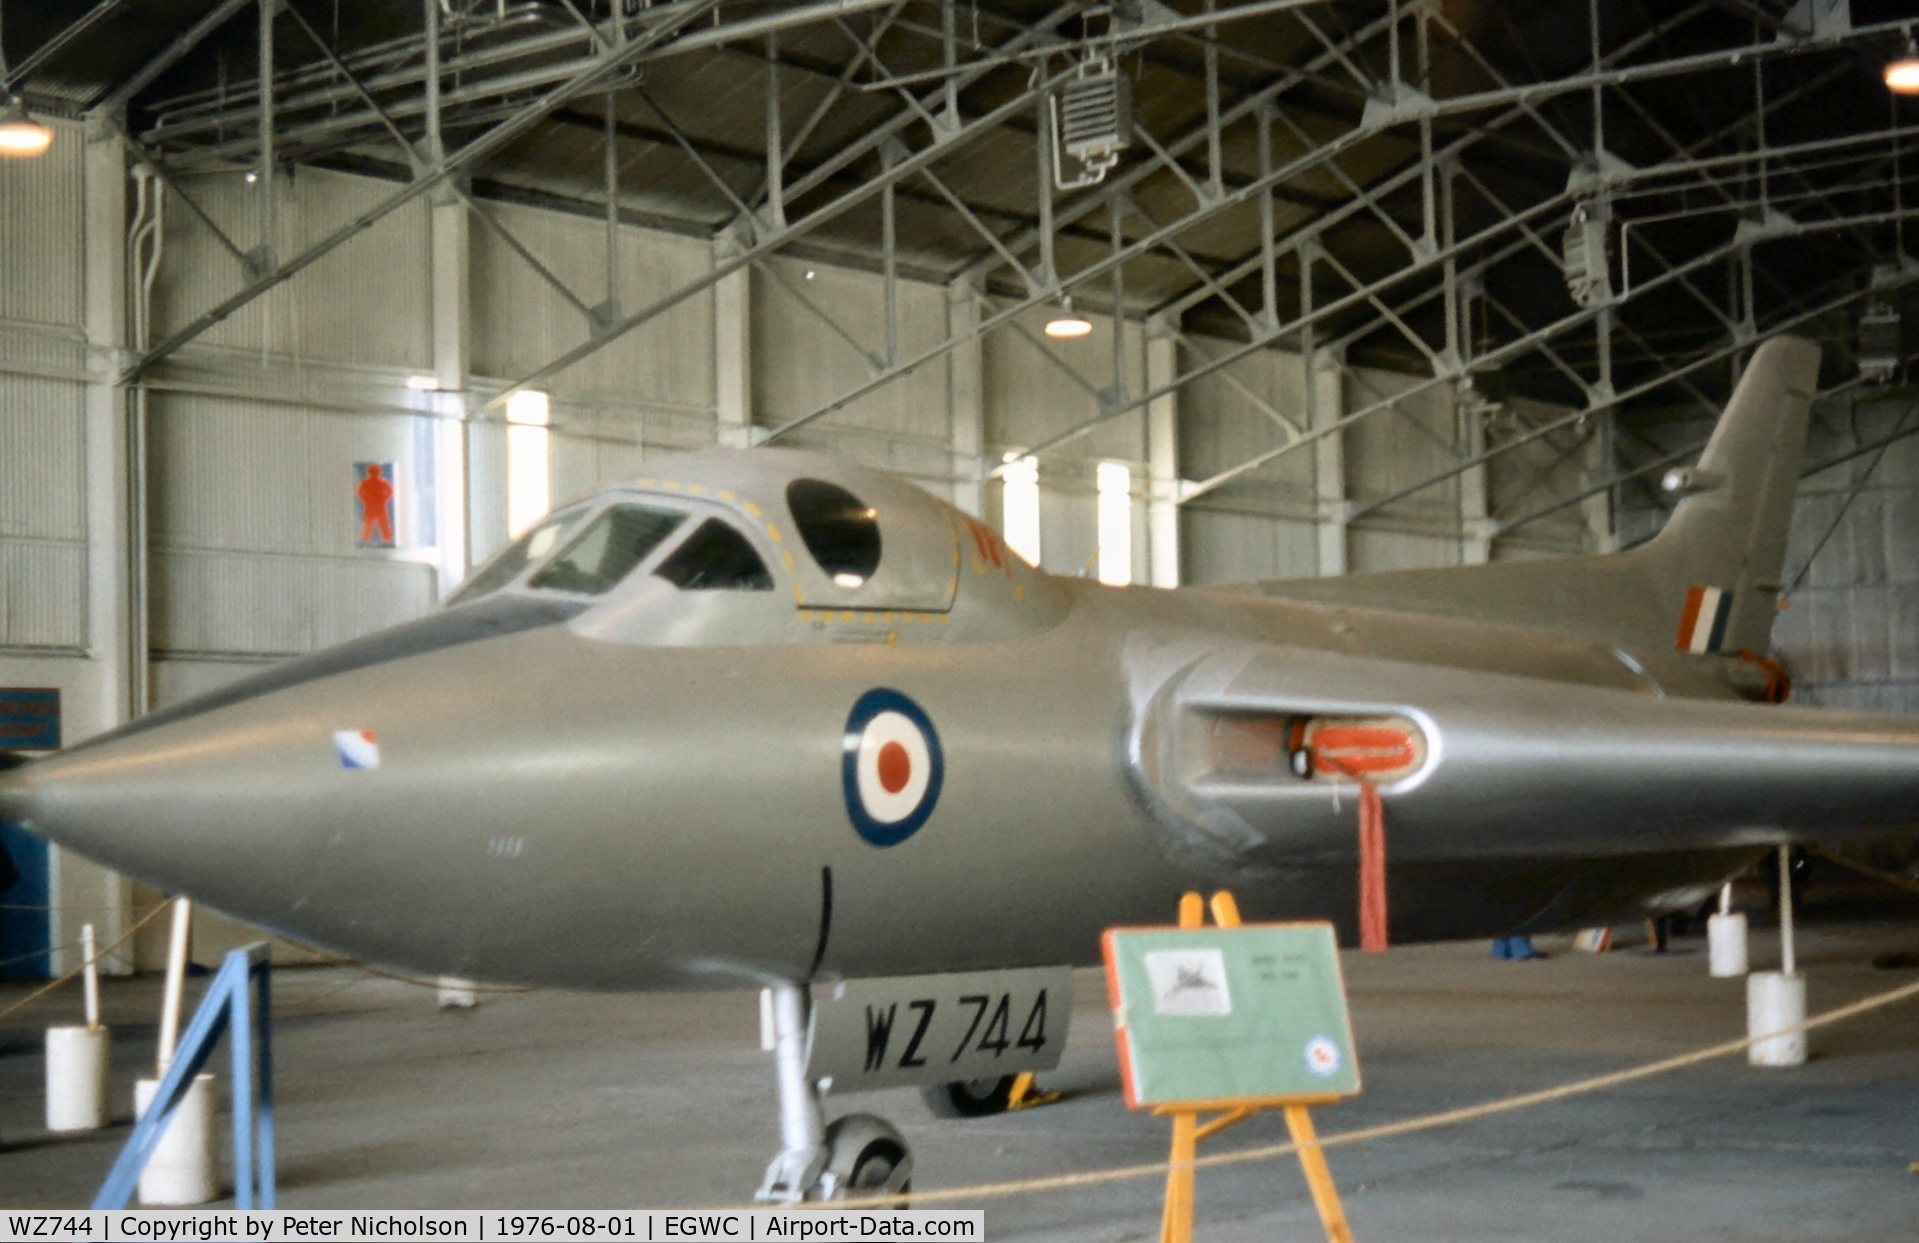 WZ744, 1953 Avro 707C C/N Not found WZ744, Another view of the Avro 707C research aircraft on display at Cosford in the Summer of 1976.